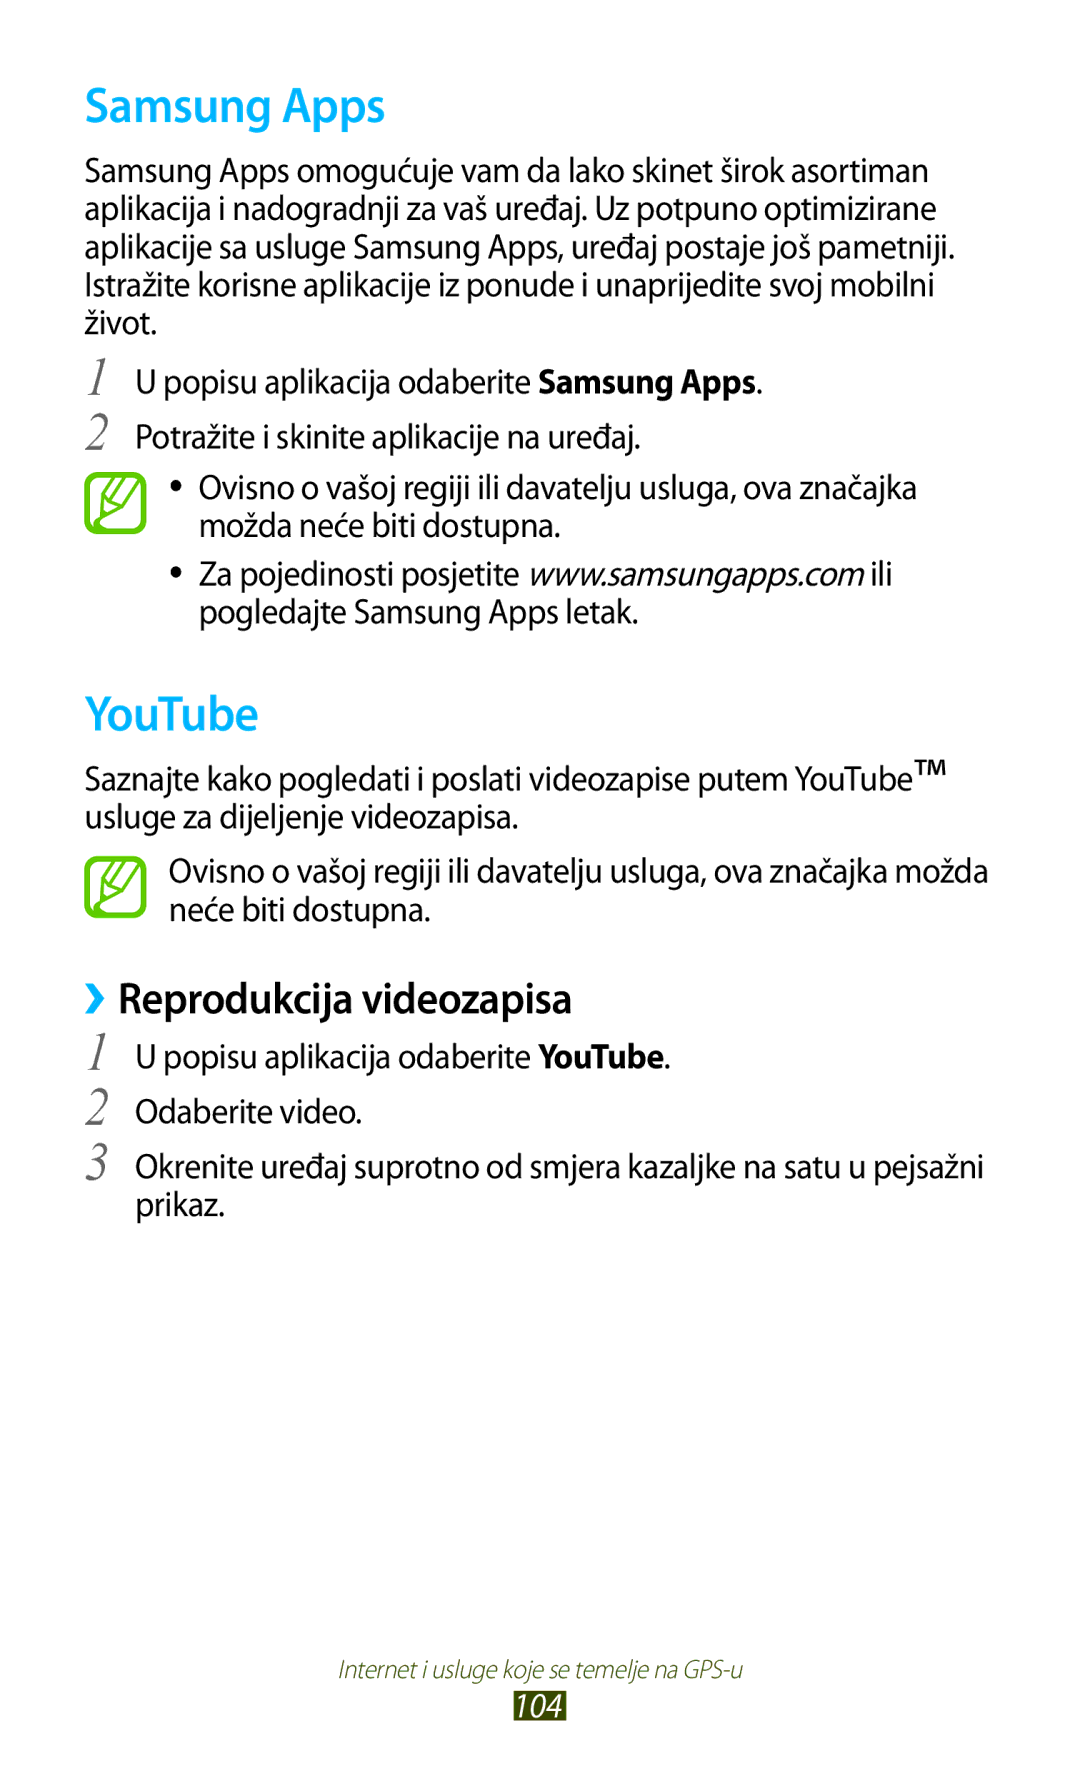 Samsung GT-S7560UWATWO, GT-S7560ZKASEE, GT-S7560ZKATWO, GT-S7560UWASEE, GT2S7560ZKATWO manual Samsung Apps, YouTube, 104 